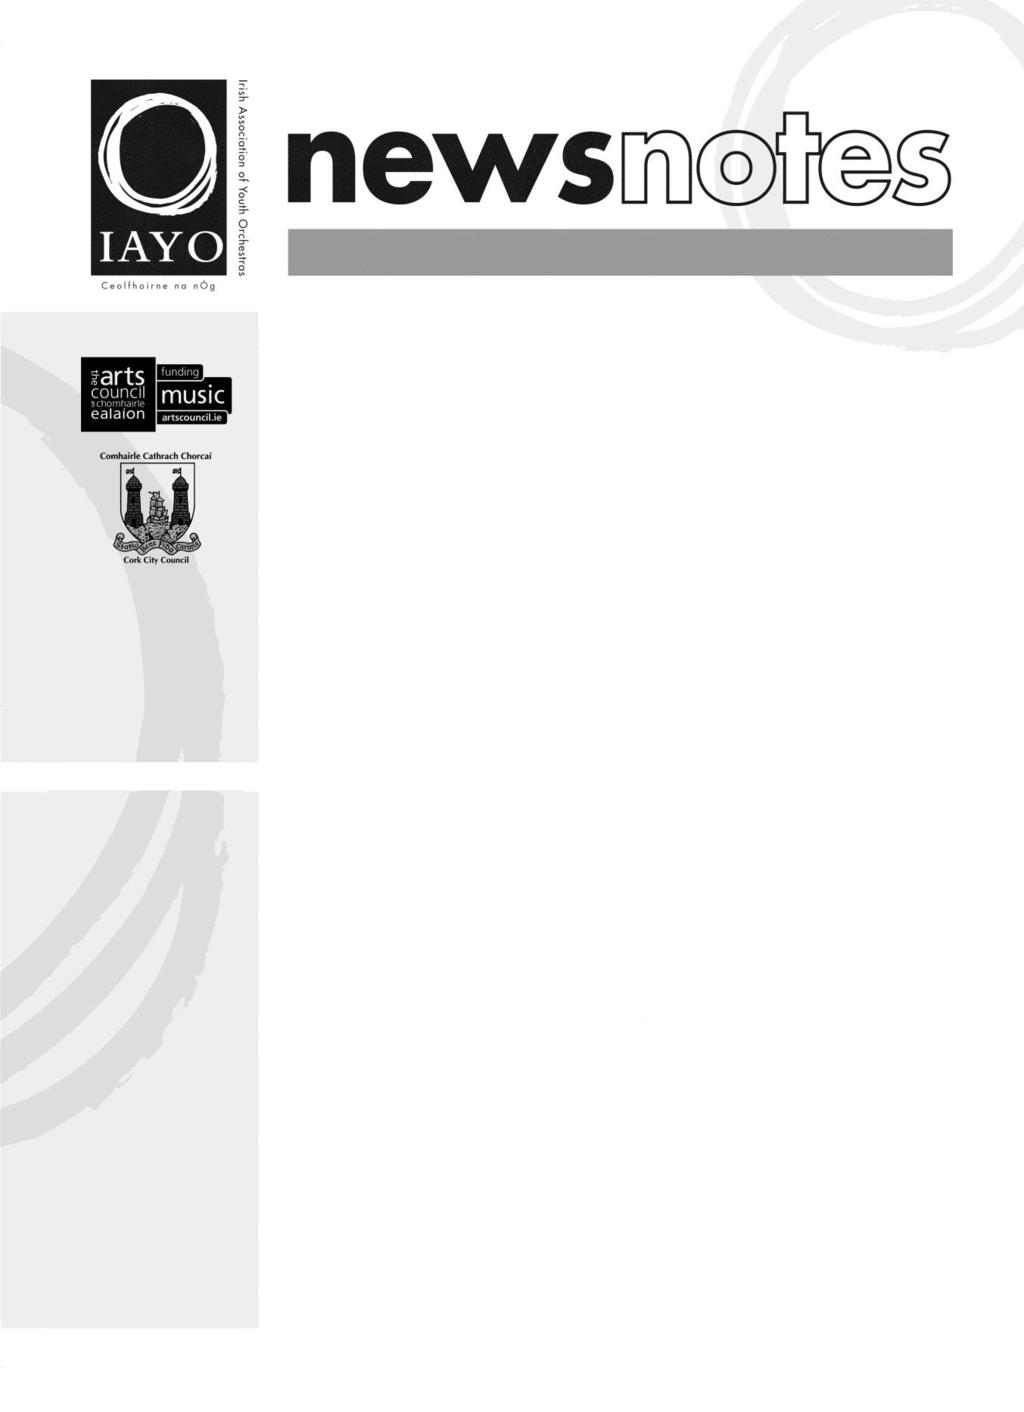 IAYO limited Civic Trust House, 50 Pope s Quay, Cork, Ireland. Telephone:: 353 21 421 5185 Fax: 353 21 421 5193 Email: info@iayo.